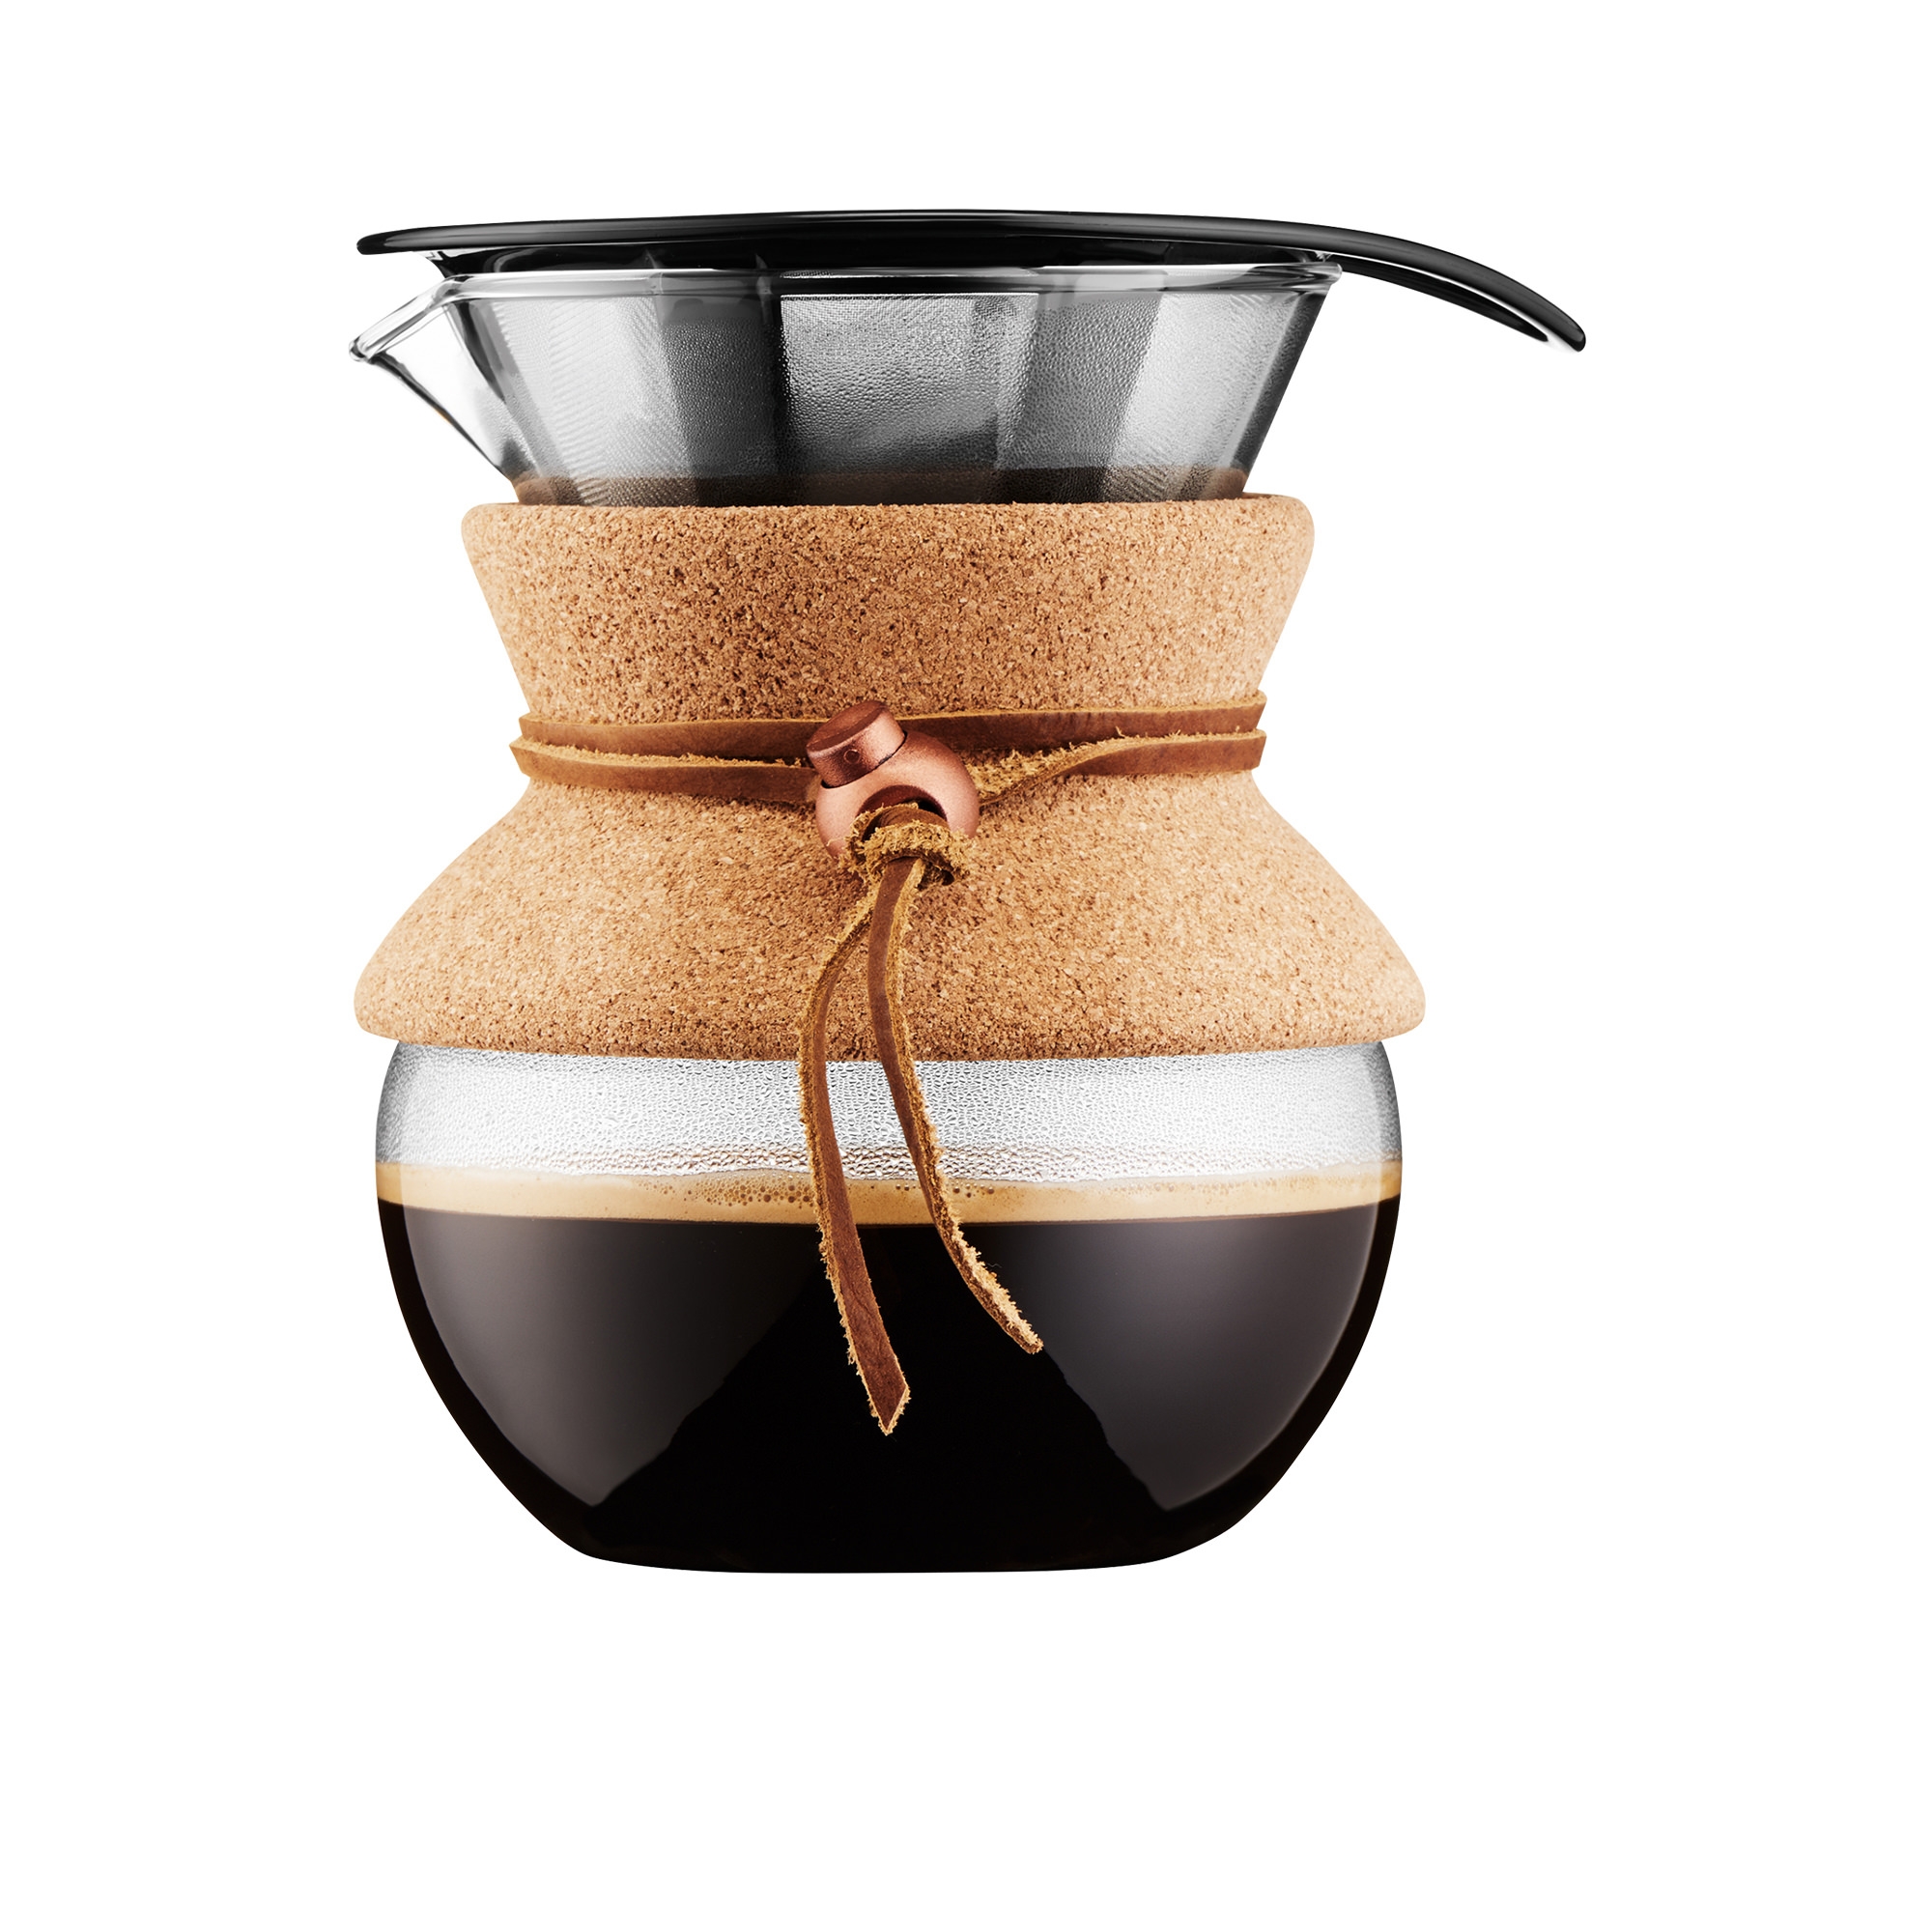 Bodum Pour Over Coffee Maker 4 Cup Cork Image 1